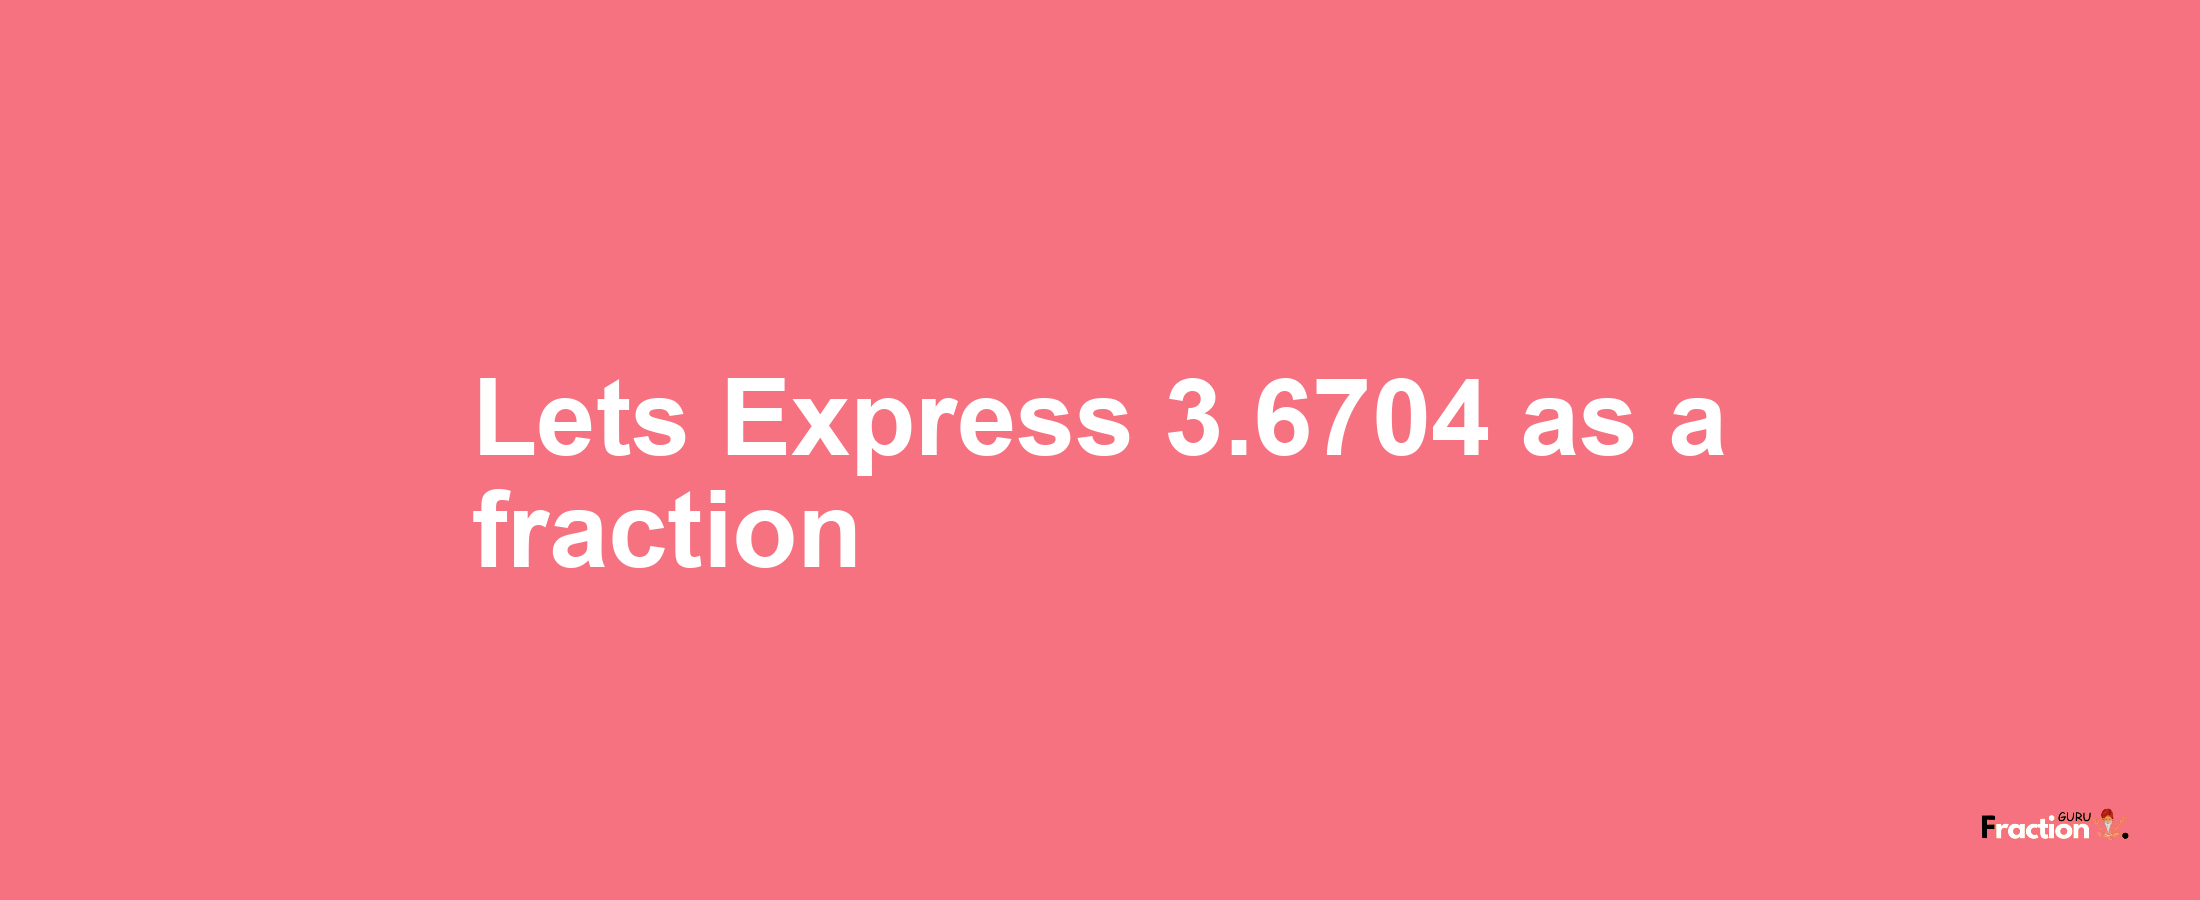 Lets Express 3.6704 as afraction